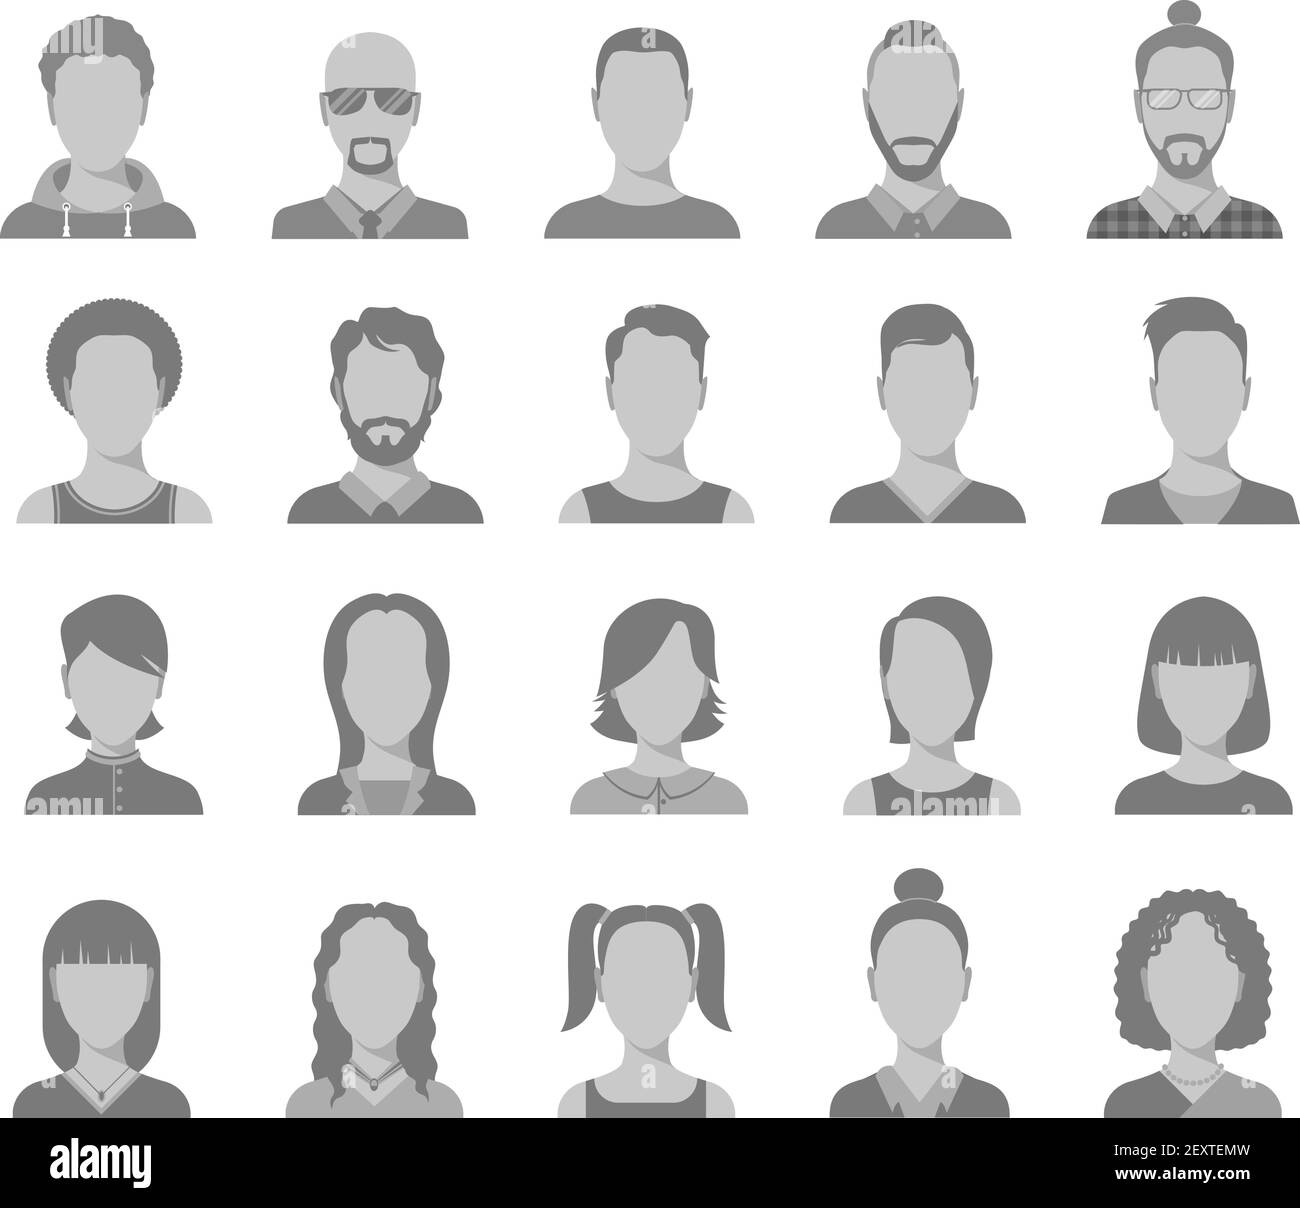 Profile icons. Male and female head silhouettes avatar, user icons, people portraits. Vector set of profile interface user, head human man and woman illustration Stock Vector